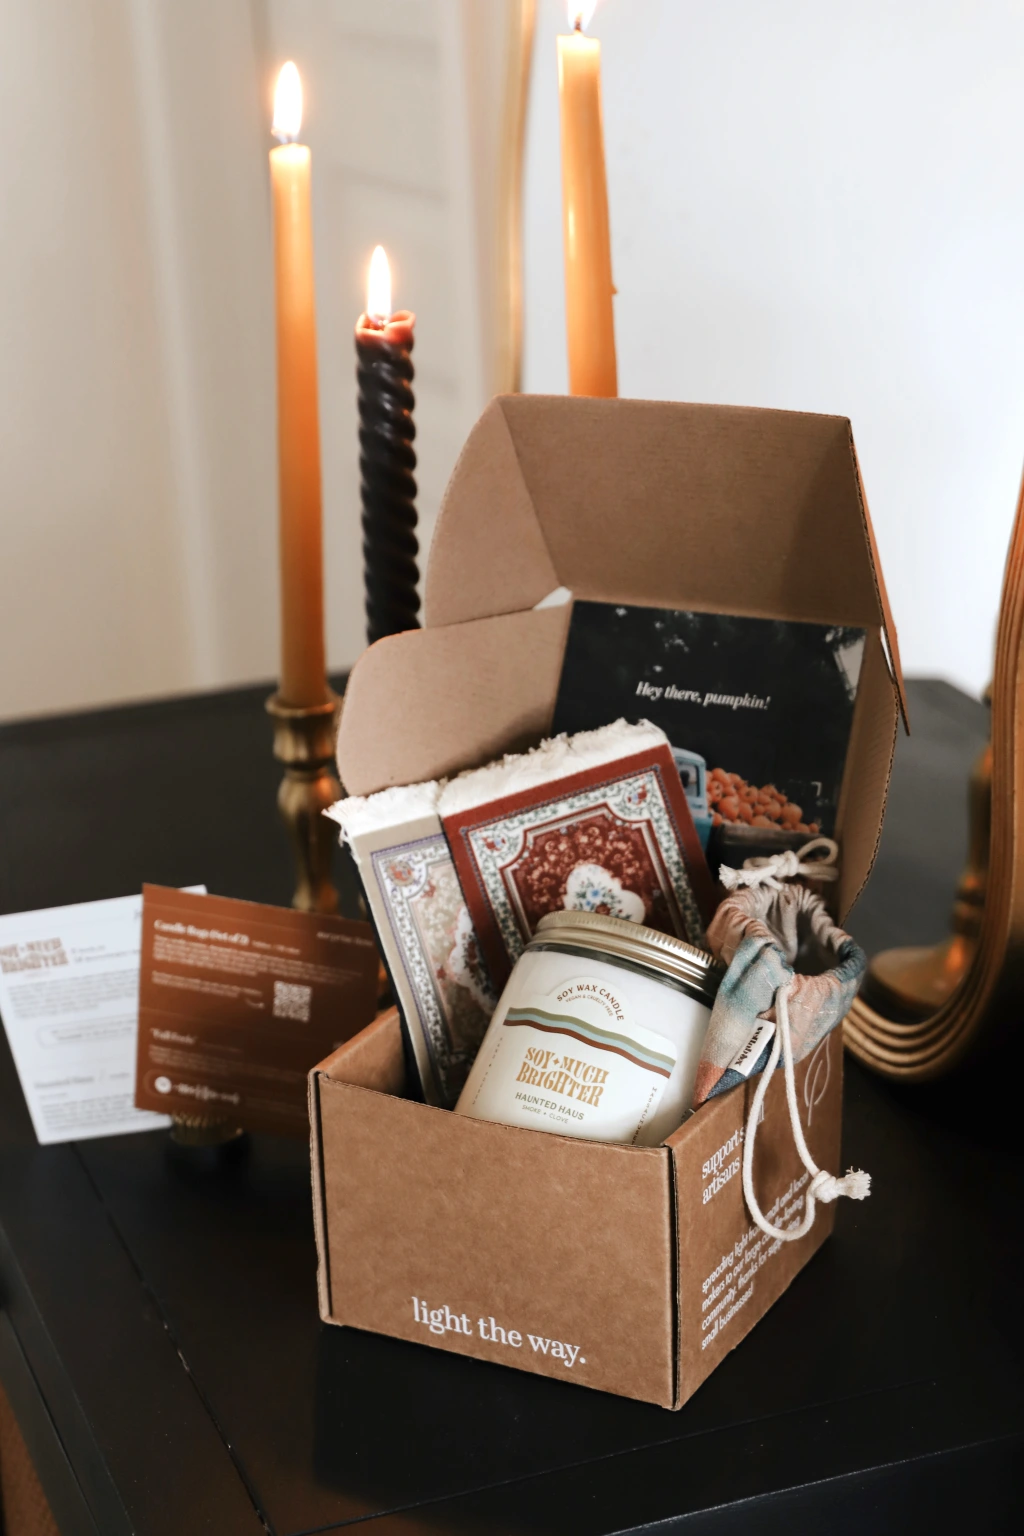 Scary-good candles coming up: October’s Vellabox spoilers